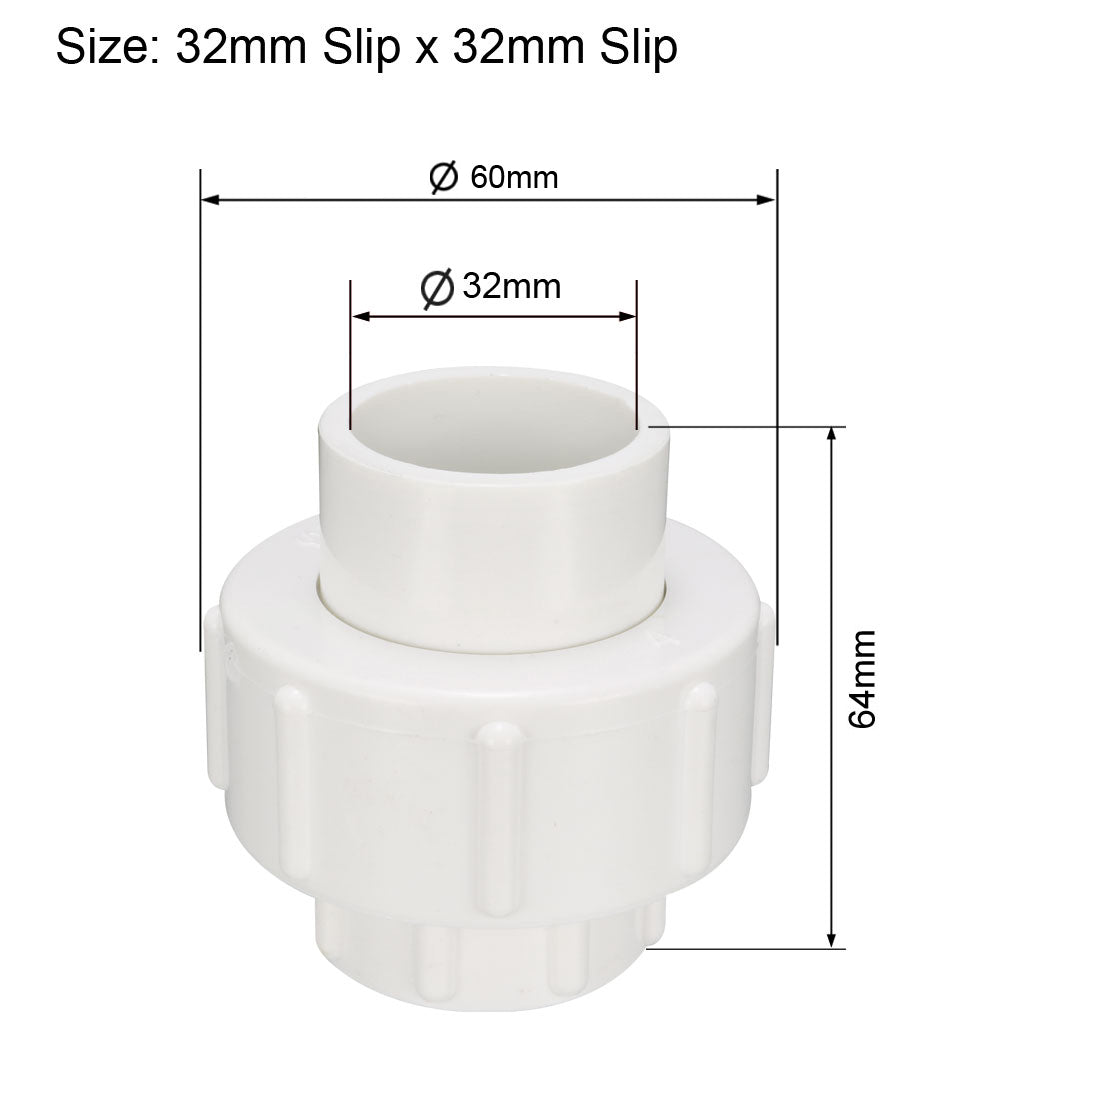 uxcell Uxcell 32mm x 32mm Slip PVC Pipe Fitting Union Solvent Socket Quick Connector